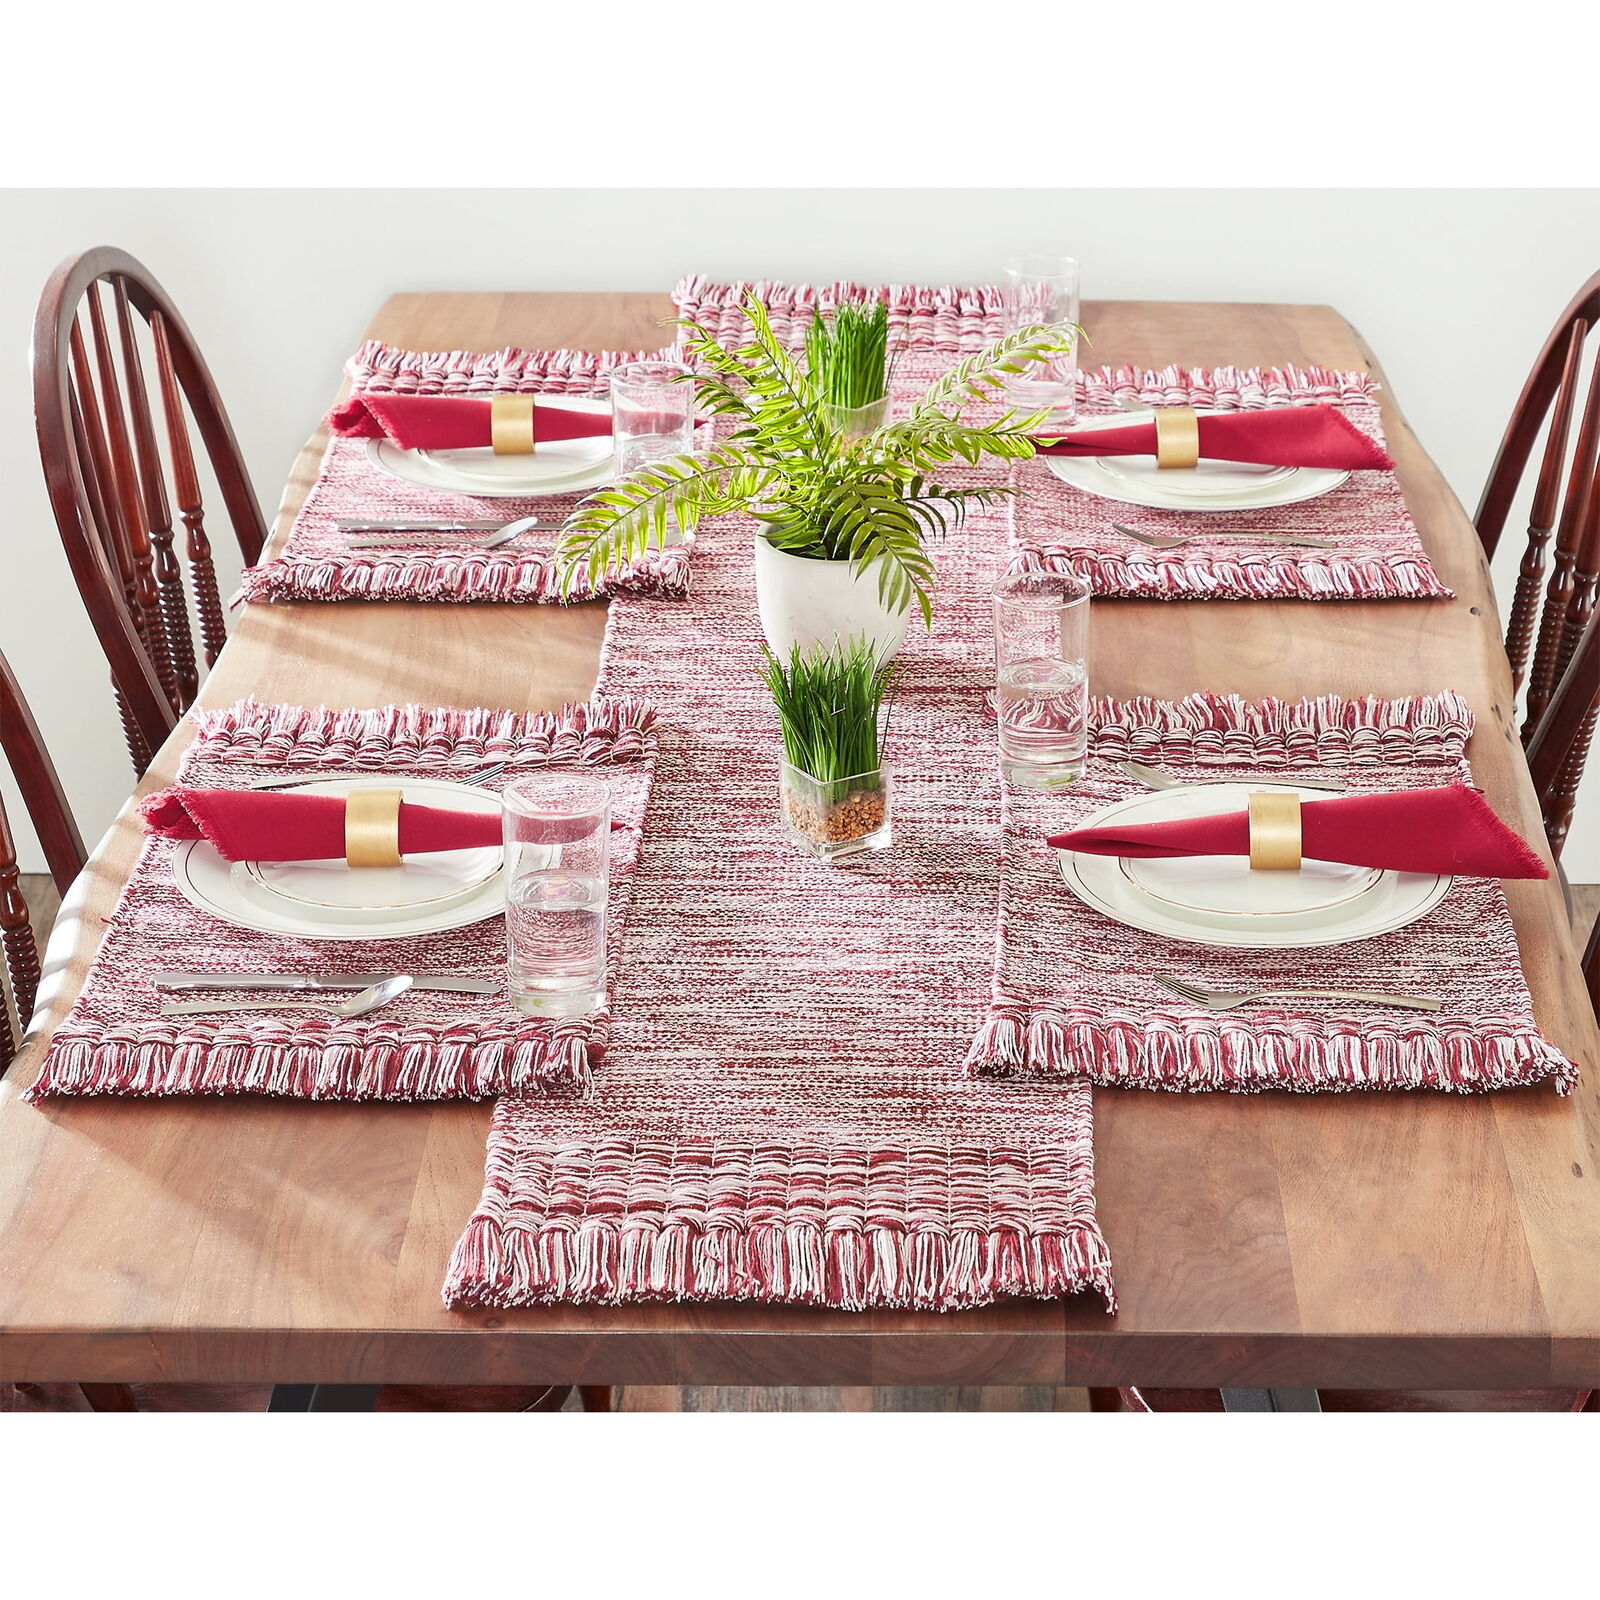 Mainstays Woven Fringe 13-Piece Coordinated Table Runner Dining Set, Rusty Brick Mainstays